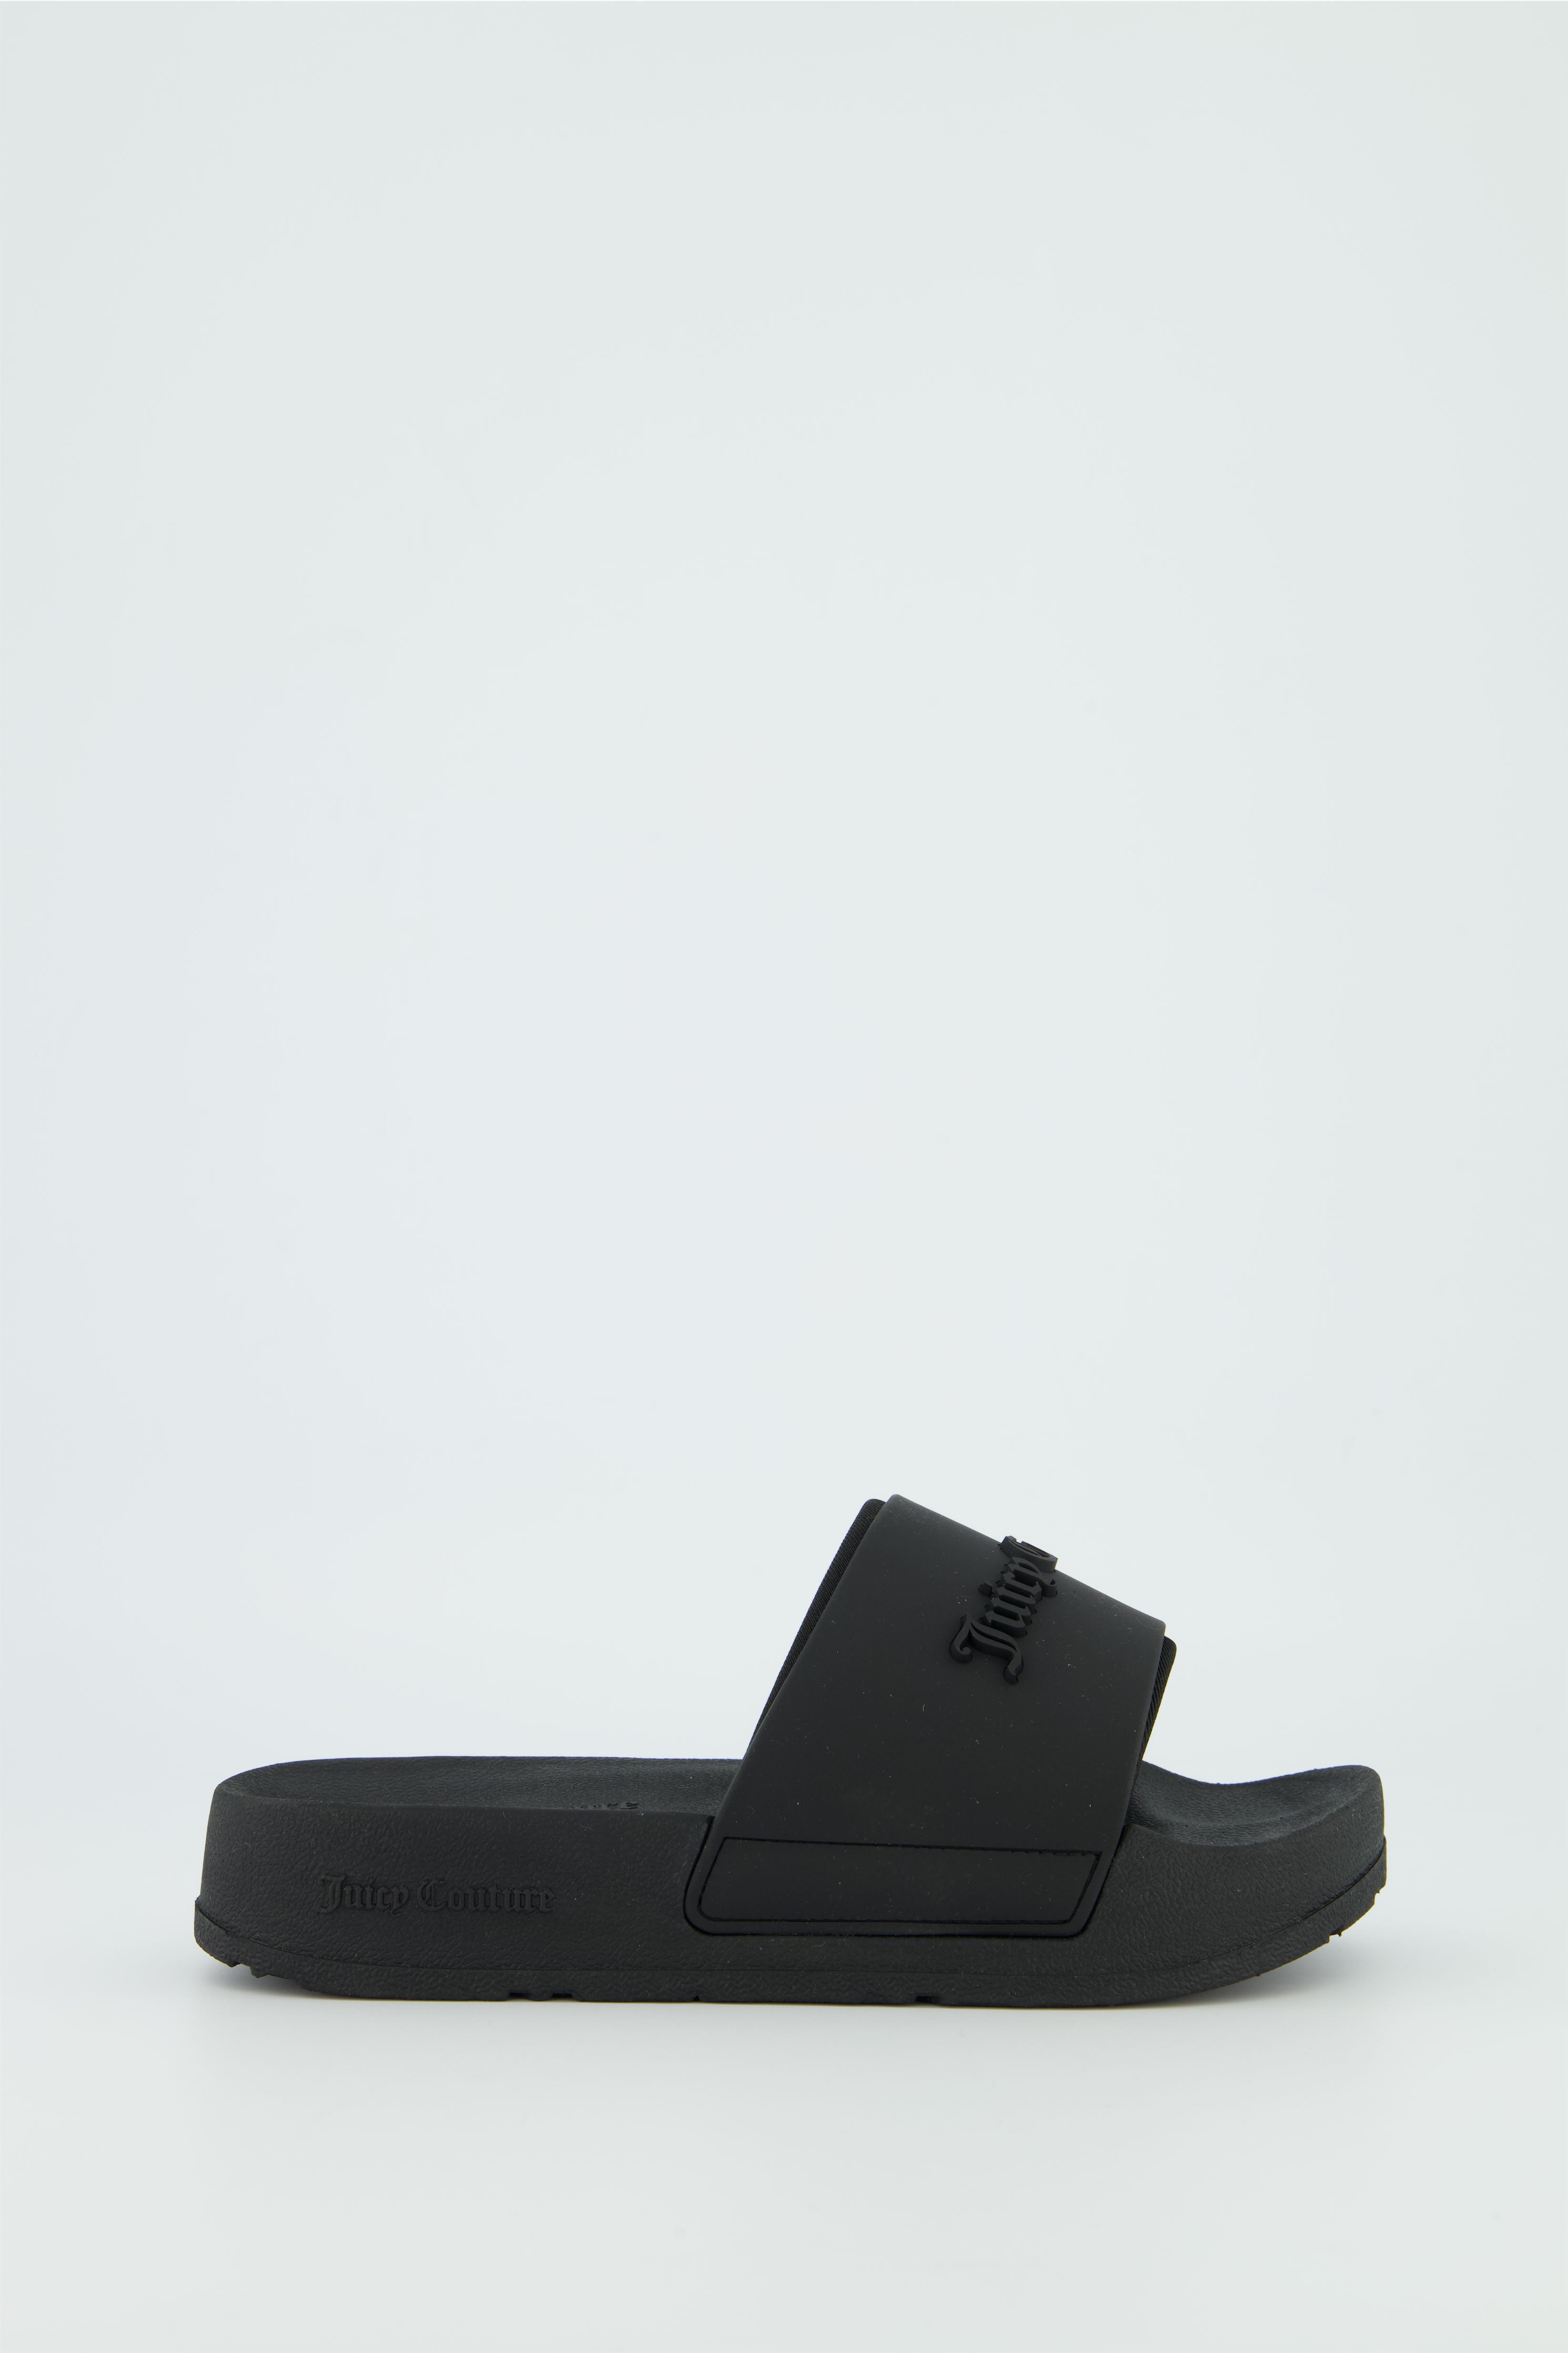 Women's Juicy Couture Black Stacked Sliders